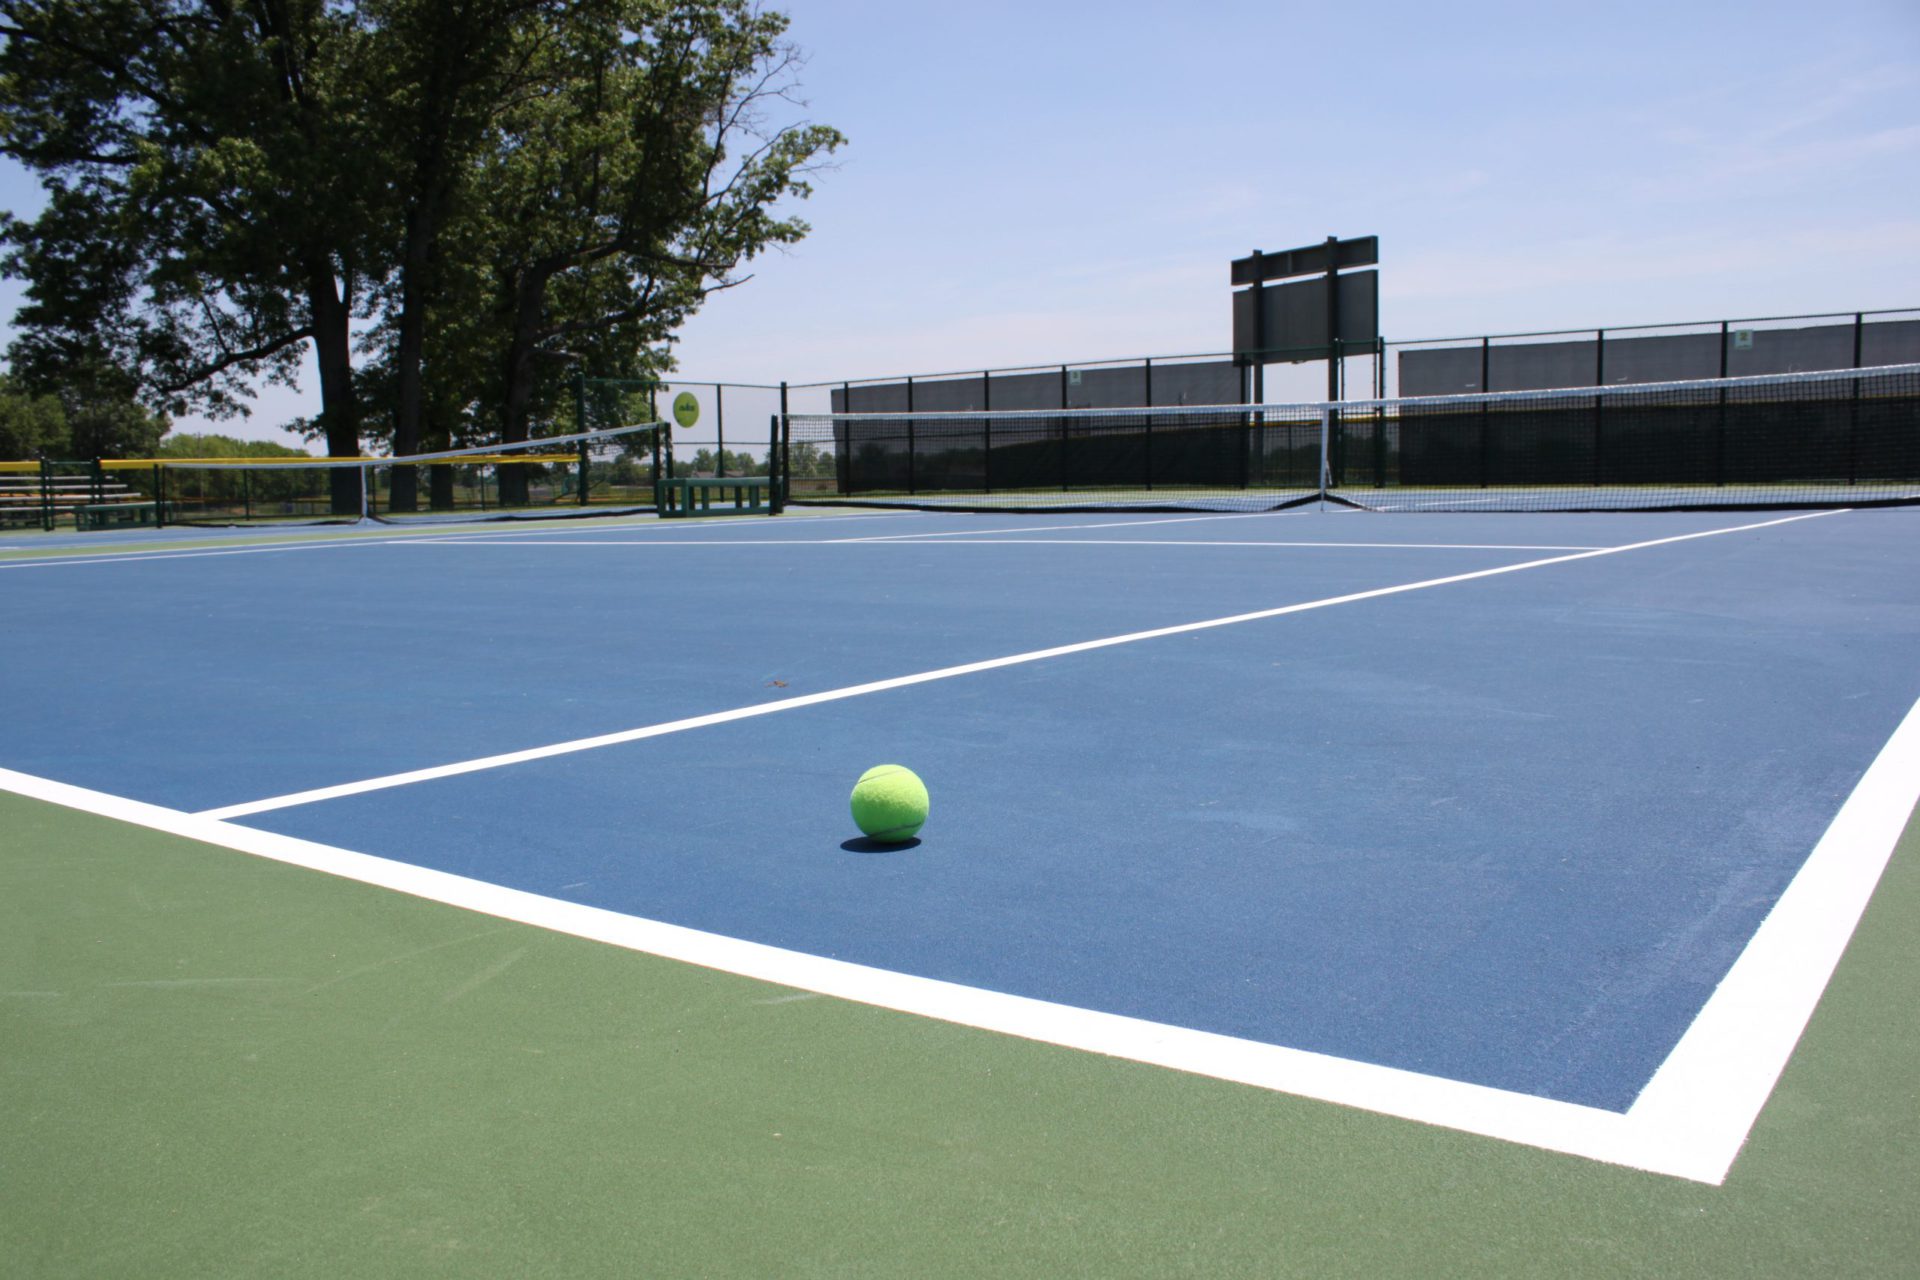 Sycamore Tennis Courts